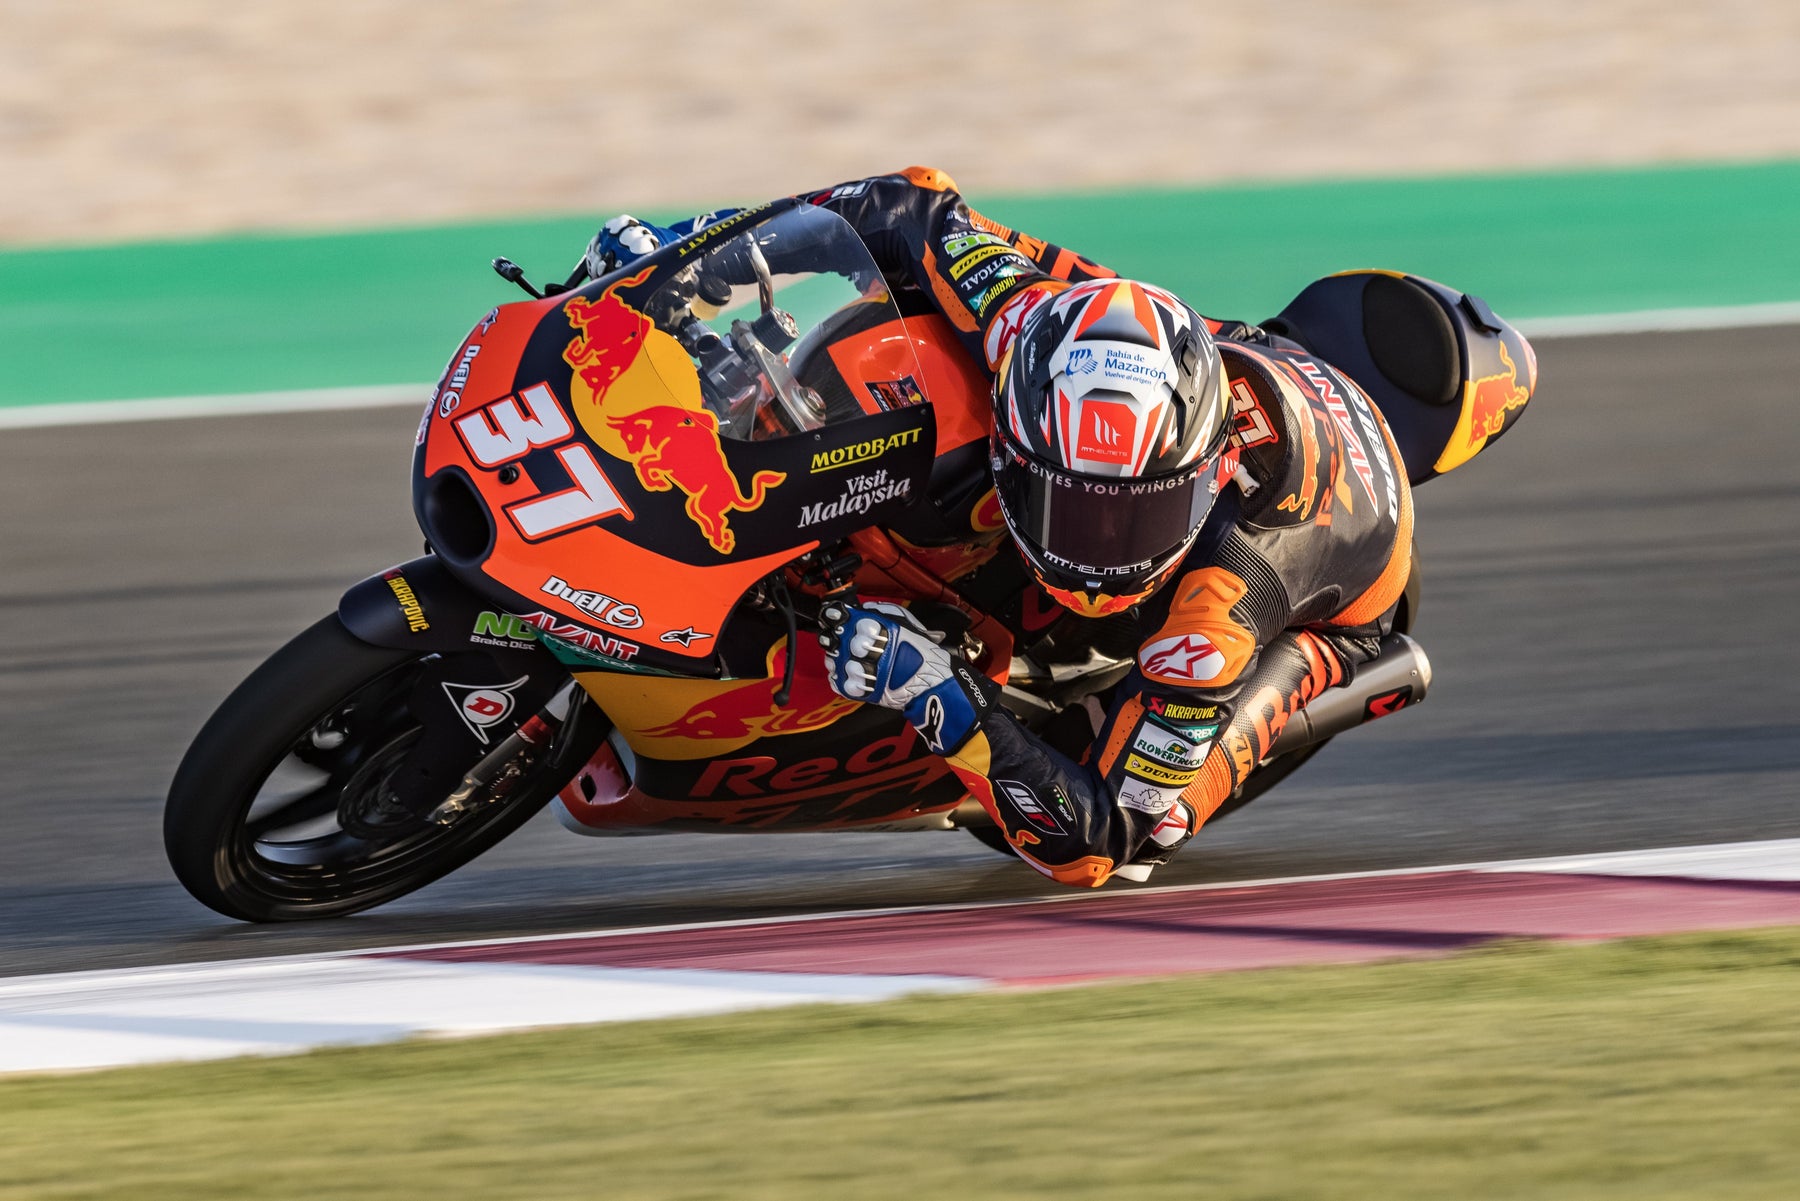 RED HOT ROOKIE PEDRO ACOSTA DELIVERS RIDING MASTERCLASS TO STORM TO MOTO3 VICTORY FROM PITLANE